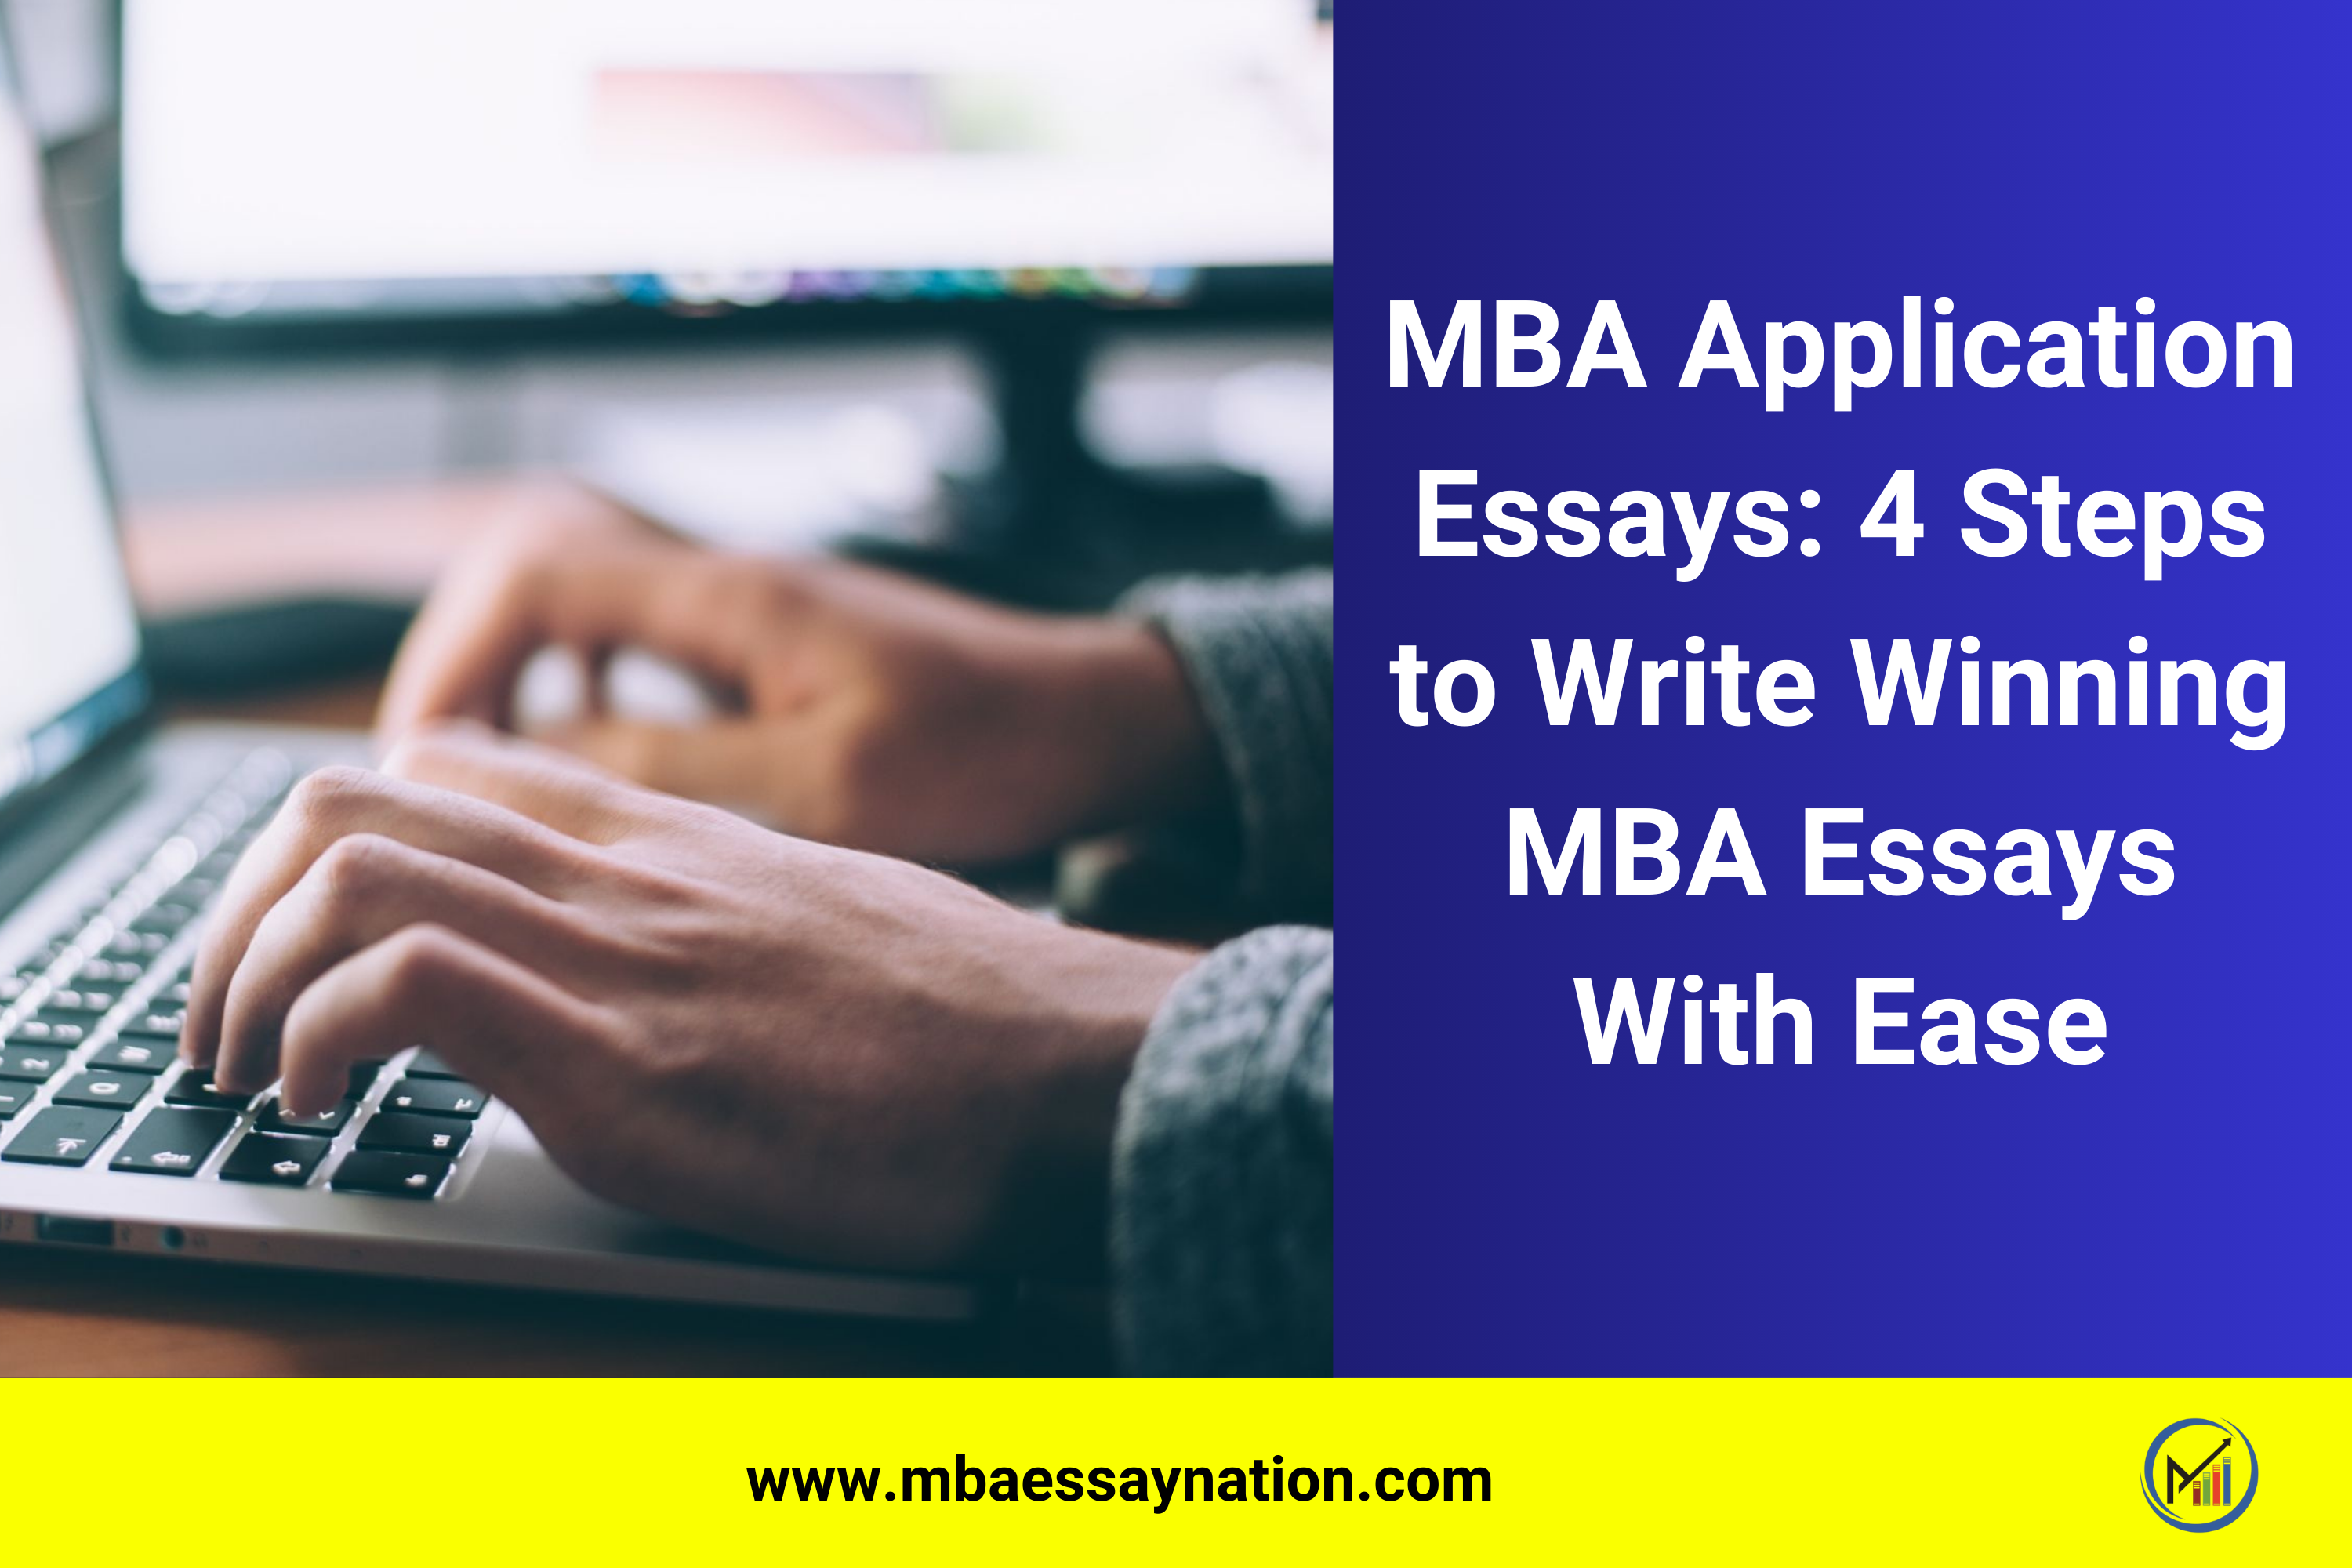 MBA Application Essays: 4 Steps to Write Winning MBA Essays With Ease